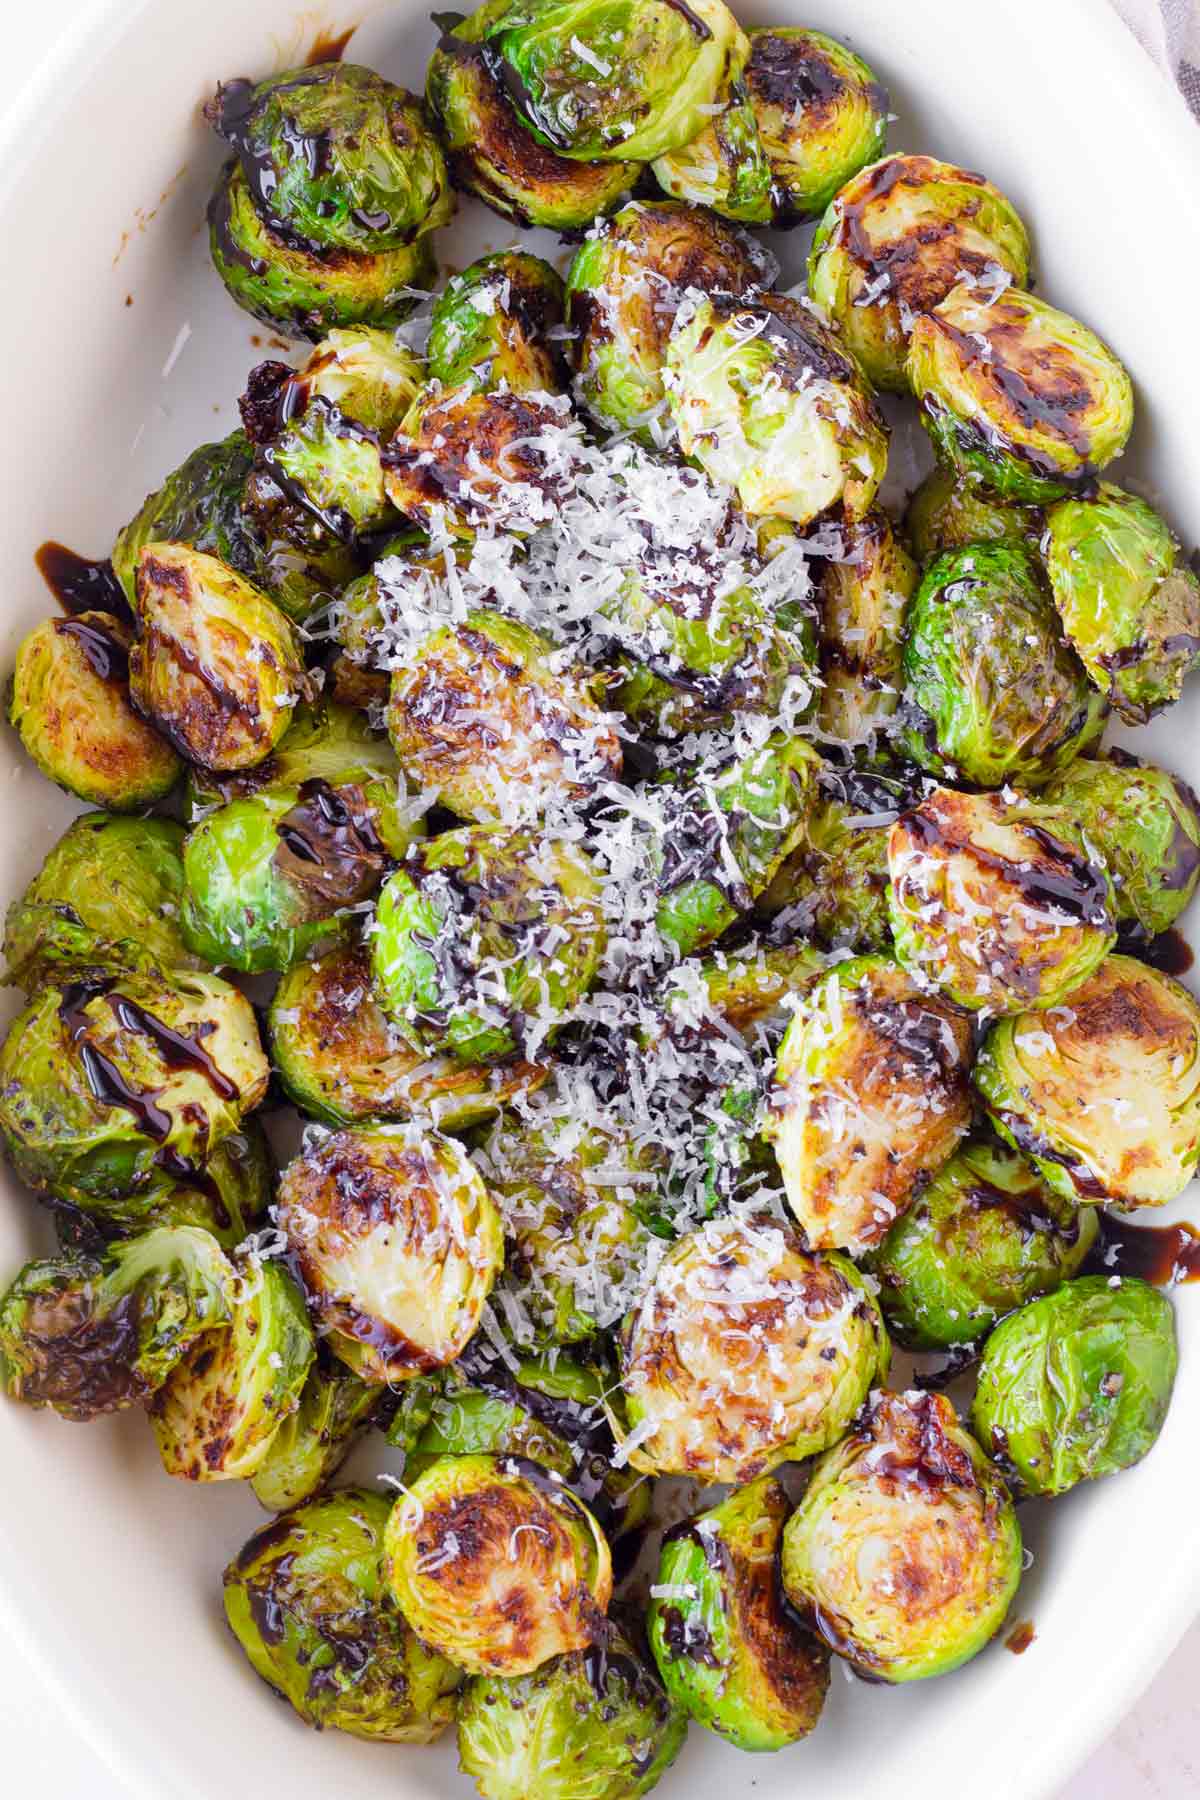 brussels sprouts with balsamic and parmesan cheese garnish